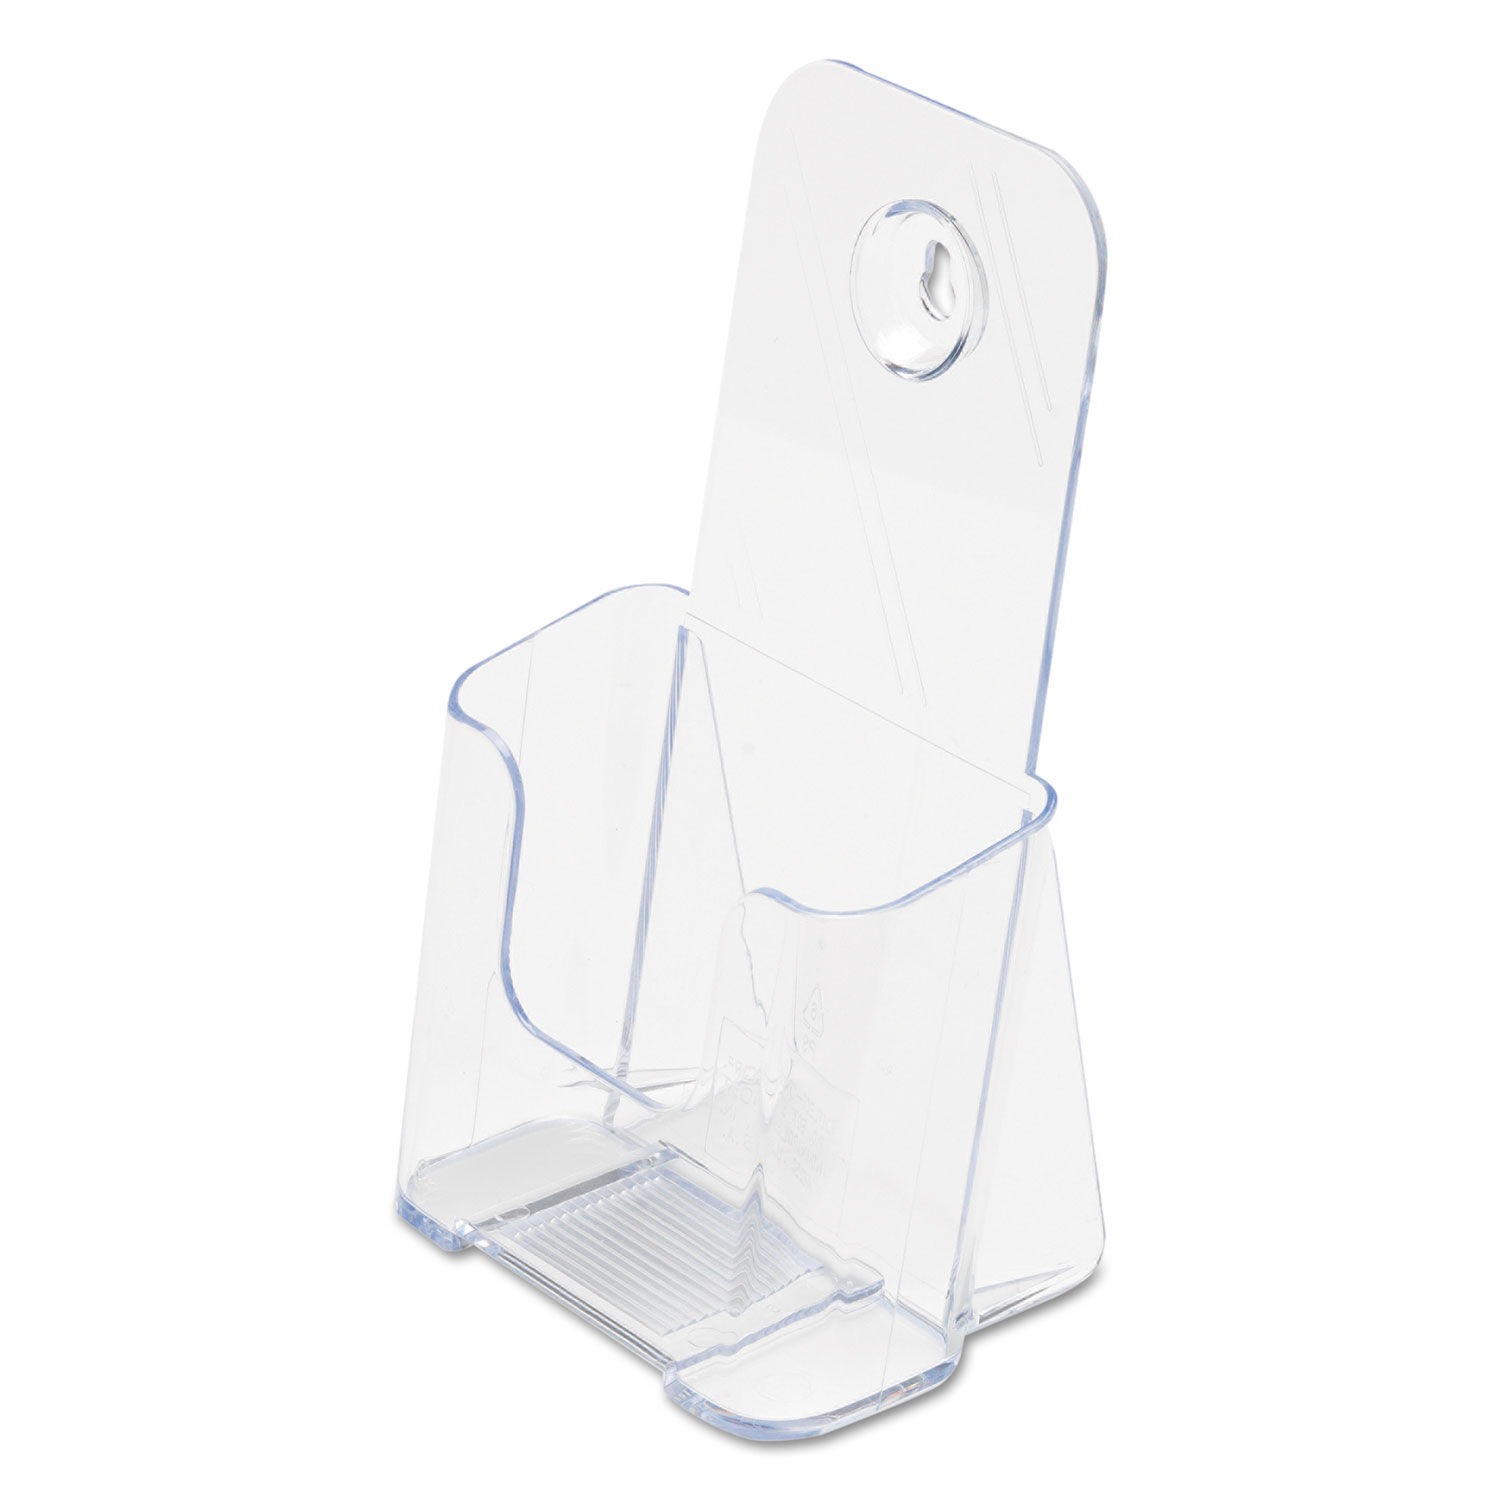 DocuHolder for Countertop/Wall-Mount Leaflet Size, 4.25w x 3.25d x 7.75h, Clear